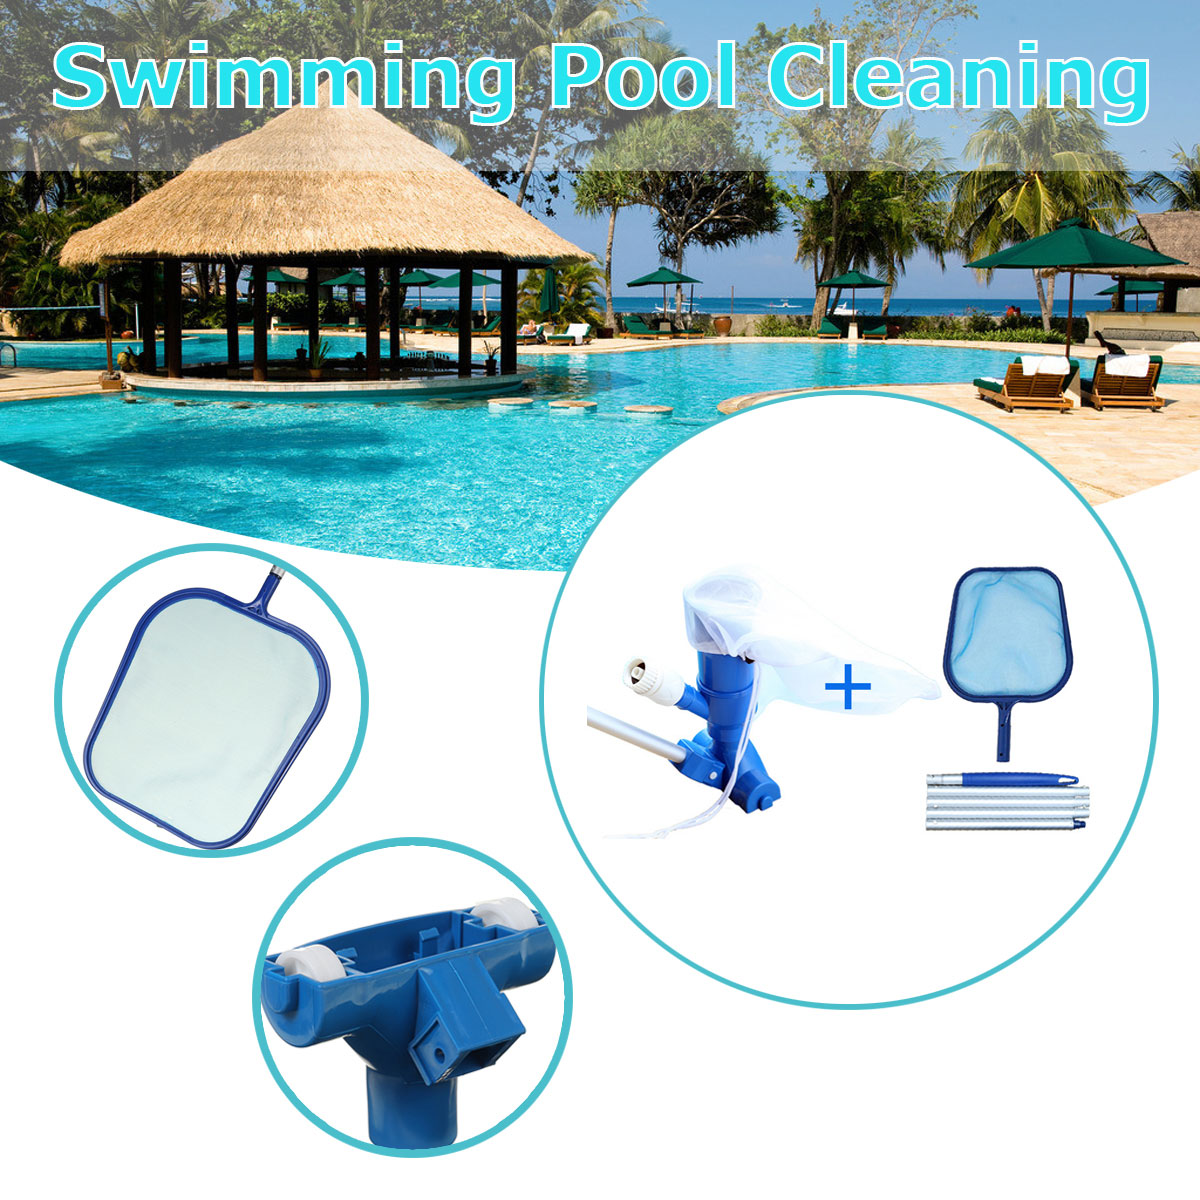 Pool-Water-Cleaning-Kit-Swimming-Vacuum-Cleaner-Leaf-Skimmer-Tool-Set-Removable-Tools-1723776-2